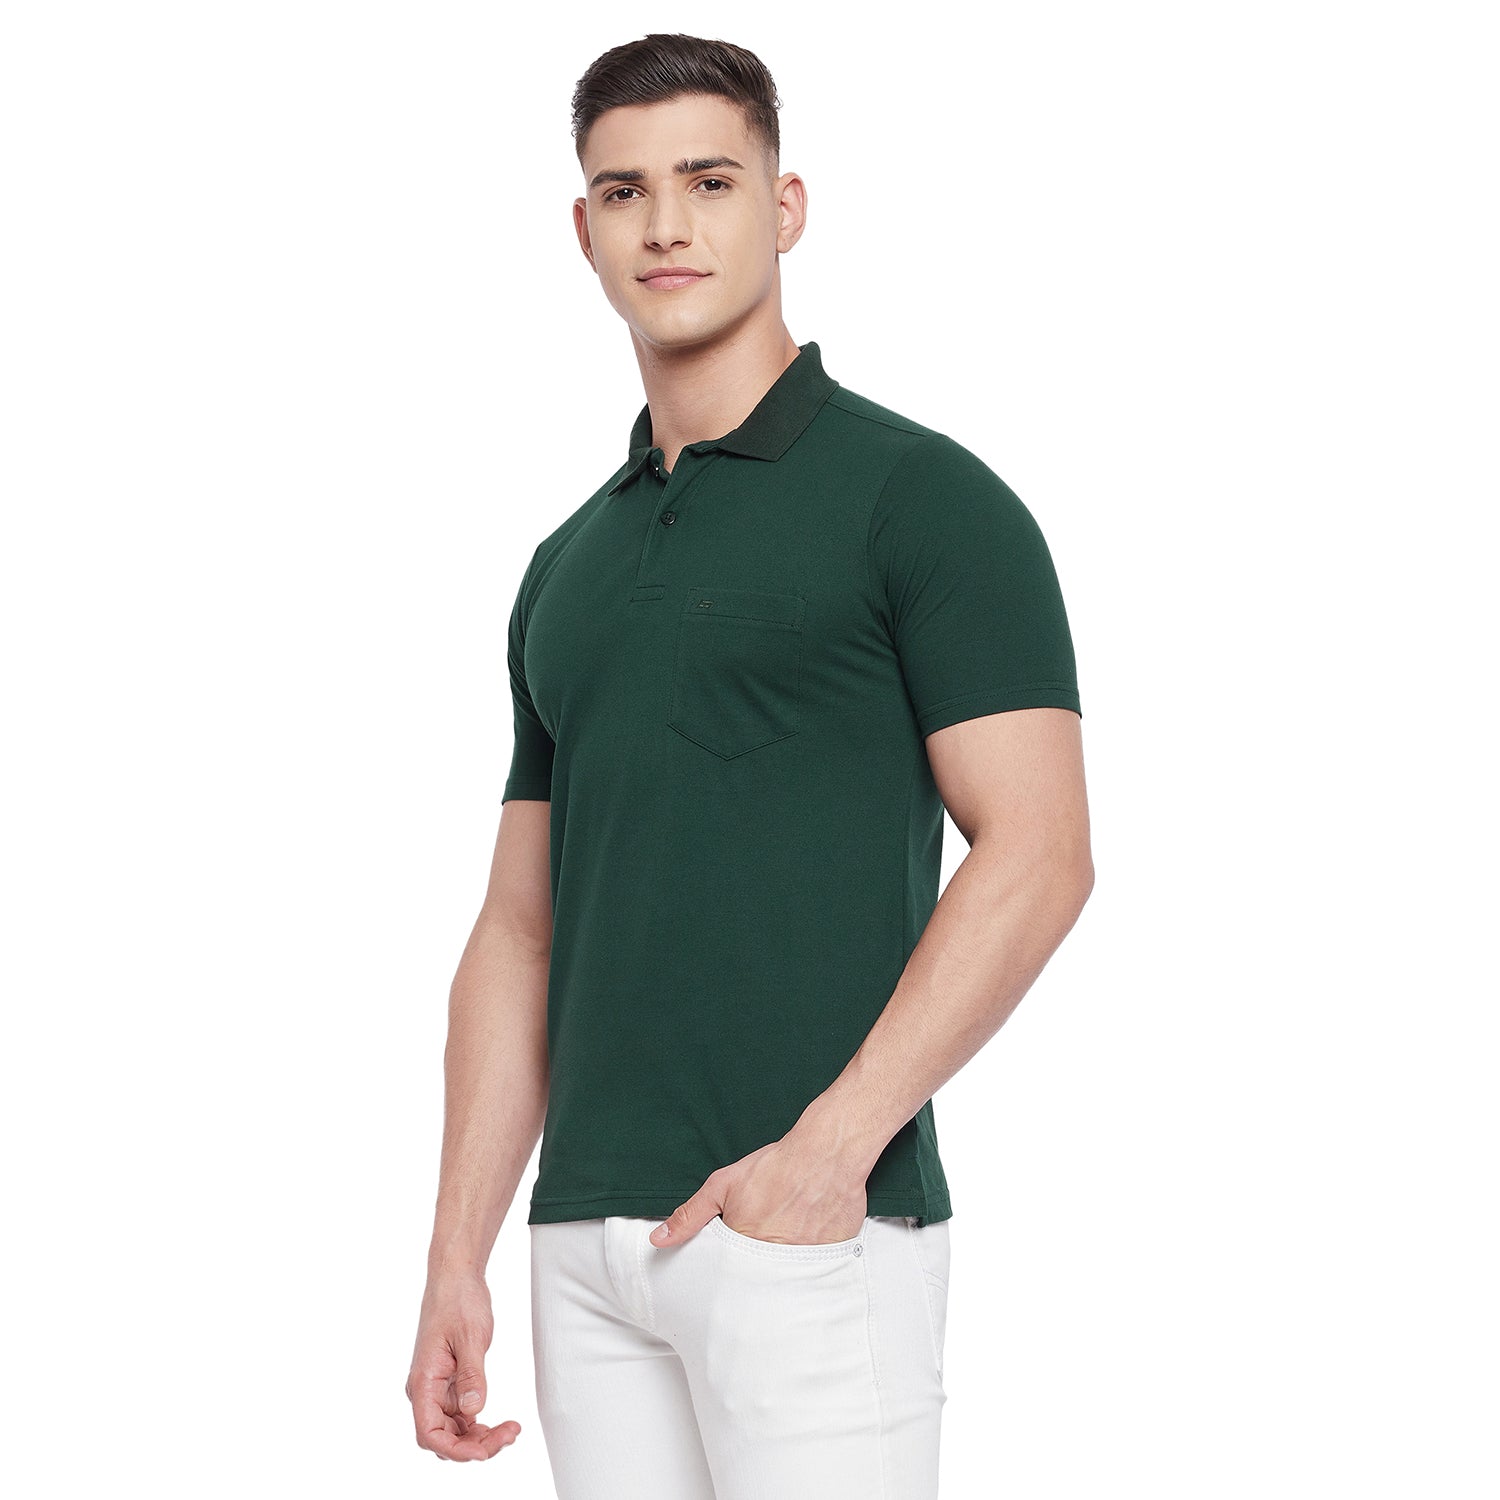 Neva Men Solid Color Polo Half Sleeve T-Shirt with Chest Pocket- Bottle Green